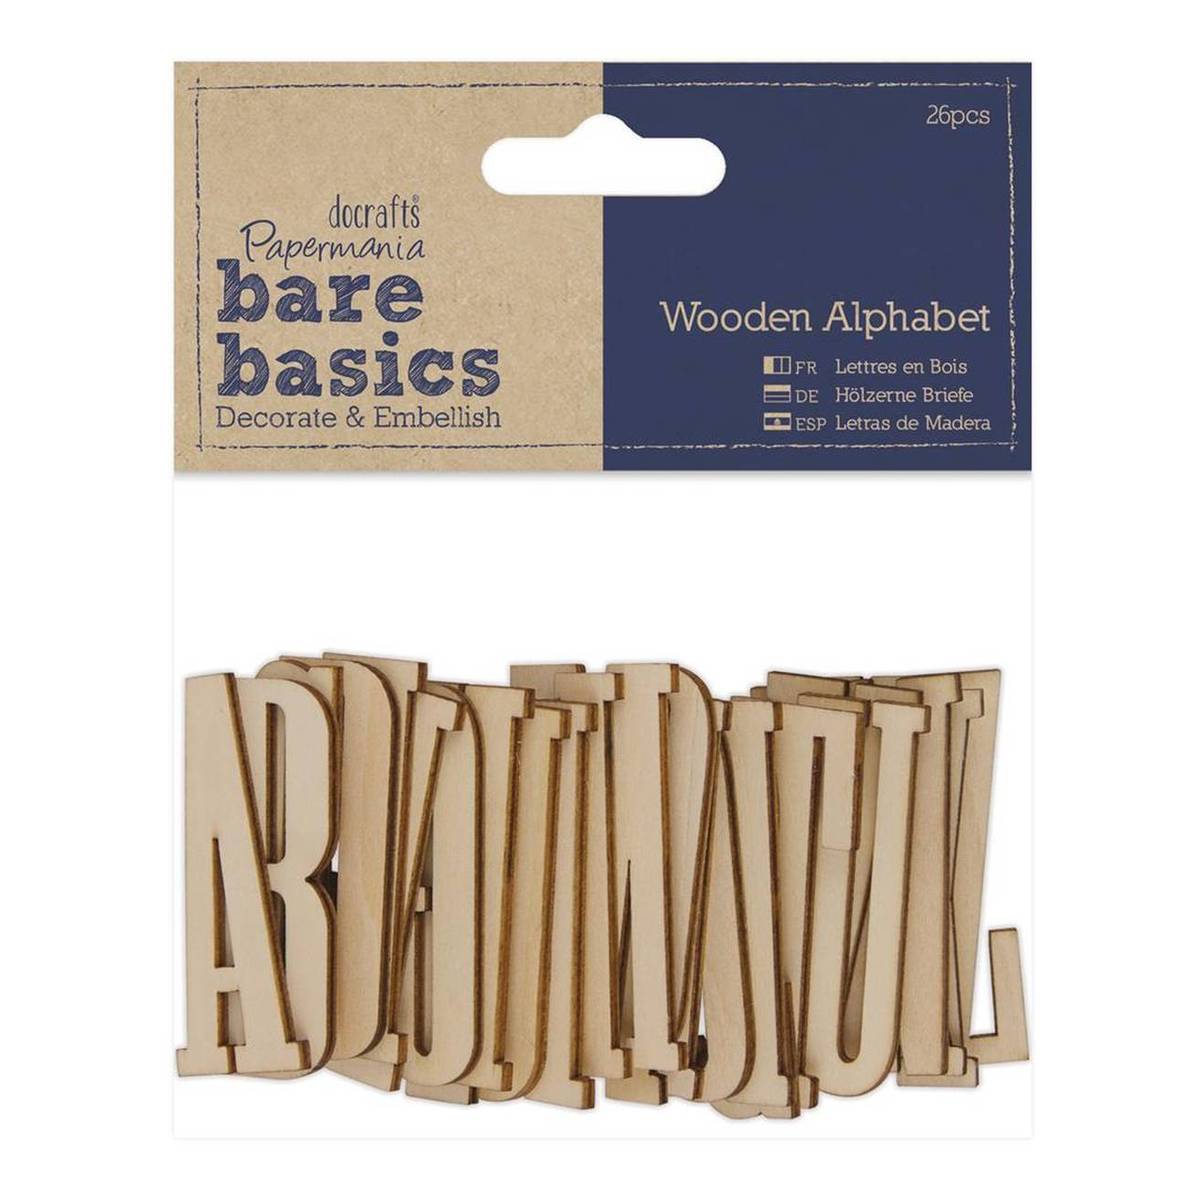 Craft Wood Letters, Natural, 3-Inch, 26-Piece